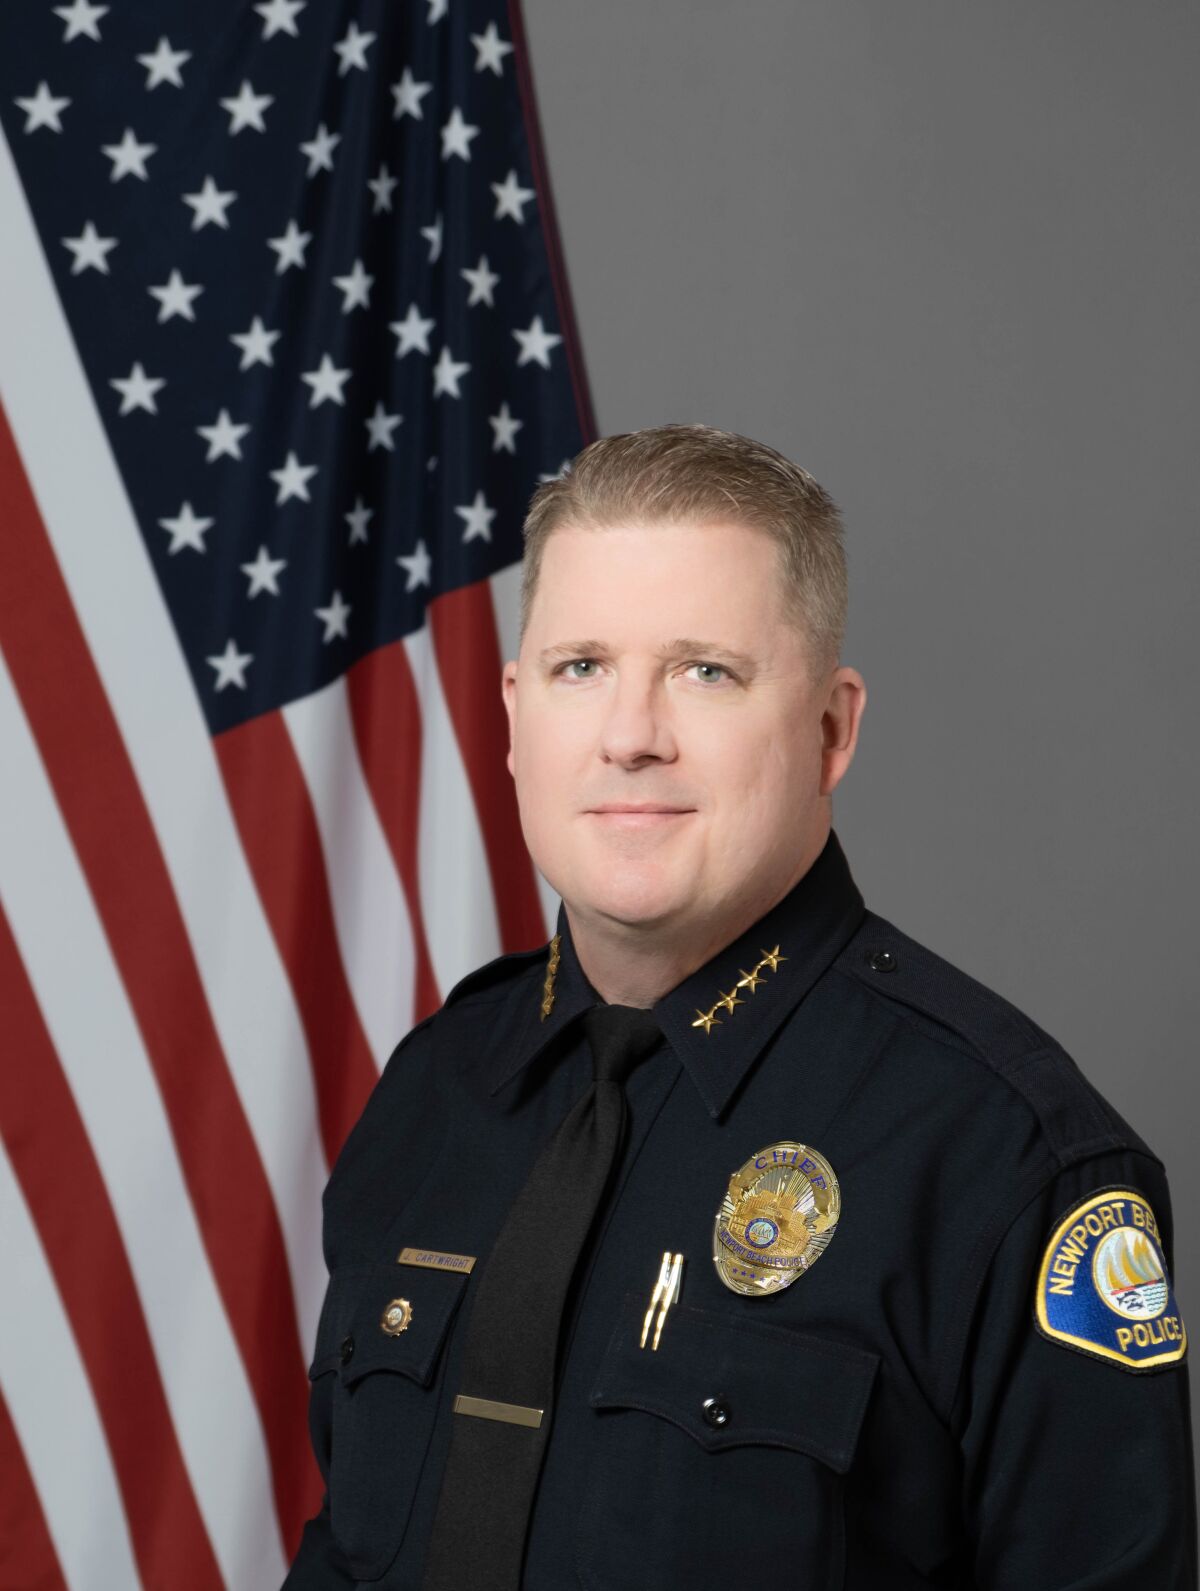 Joe Cartwright will be the 11th police chief in the Newport Beach Police Department’s history.